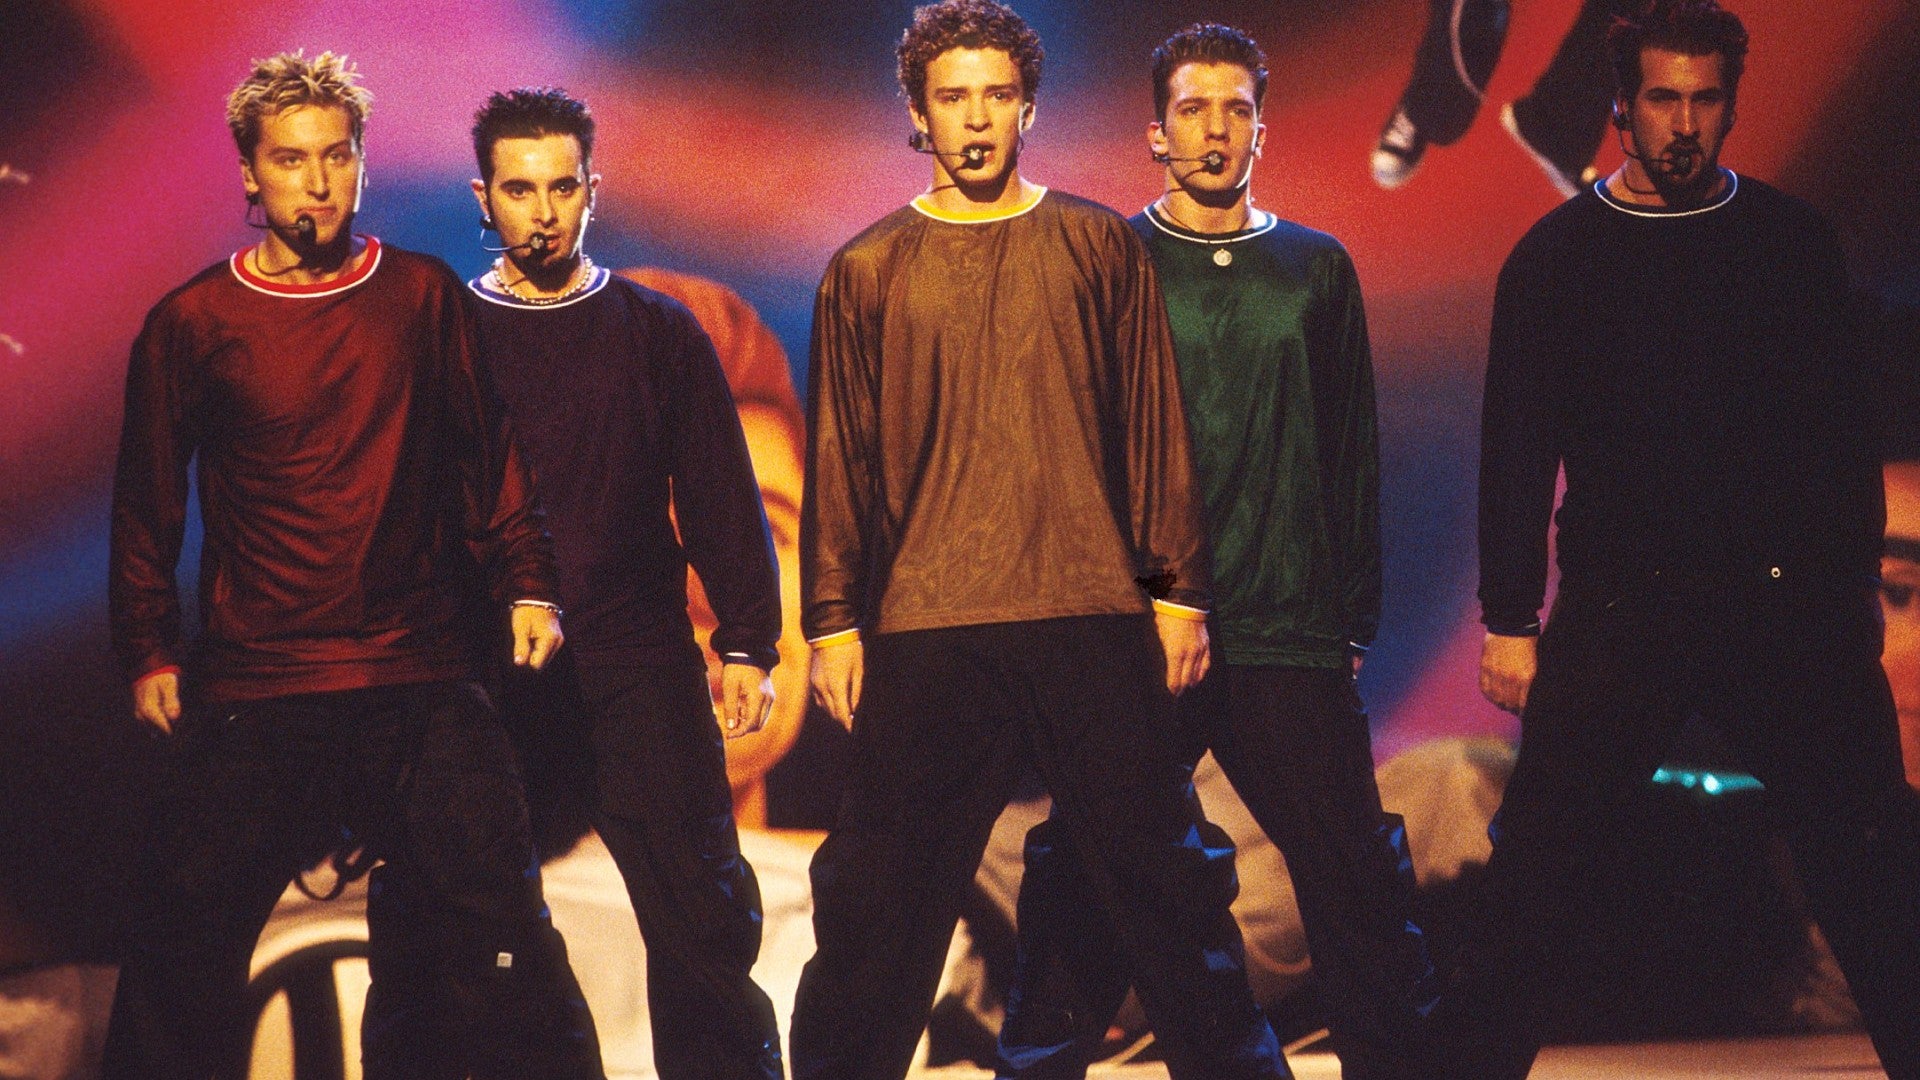 Flashback: See Justin Timberlake and the rest of 'NSYNC on TODAY in 2000